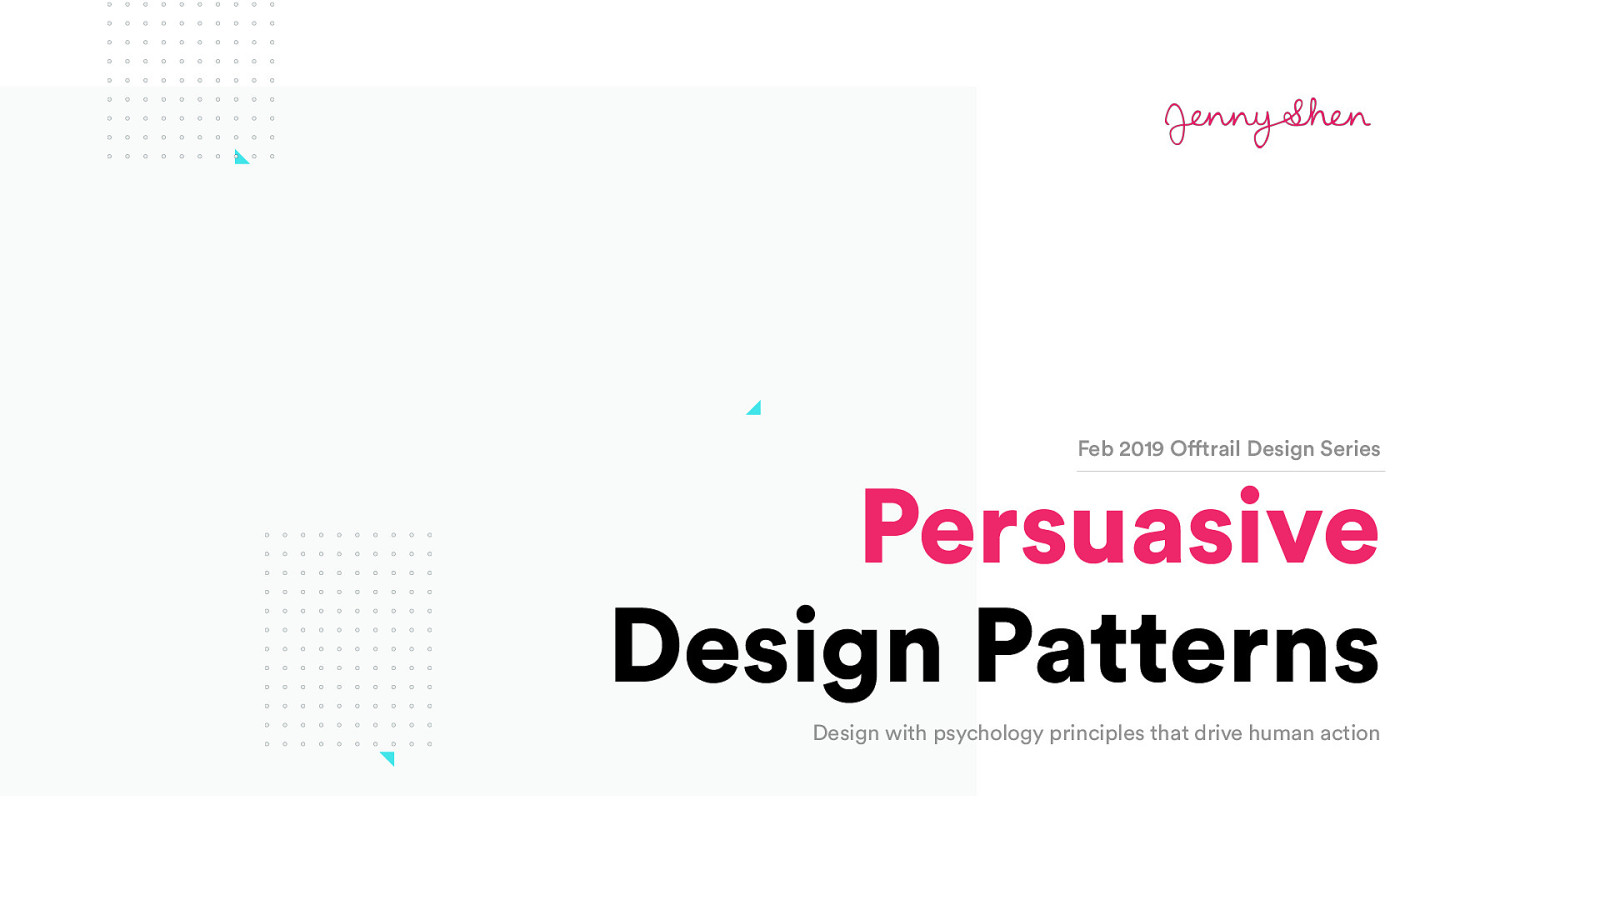 Persuasive Design Patterns—Design experiences that enhance and align with motivations